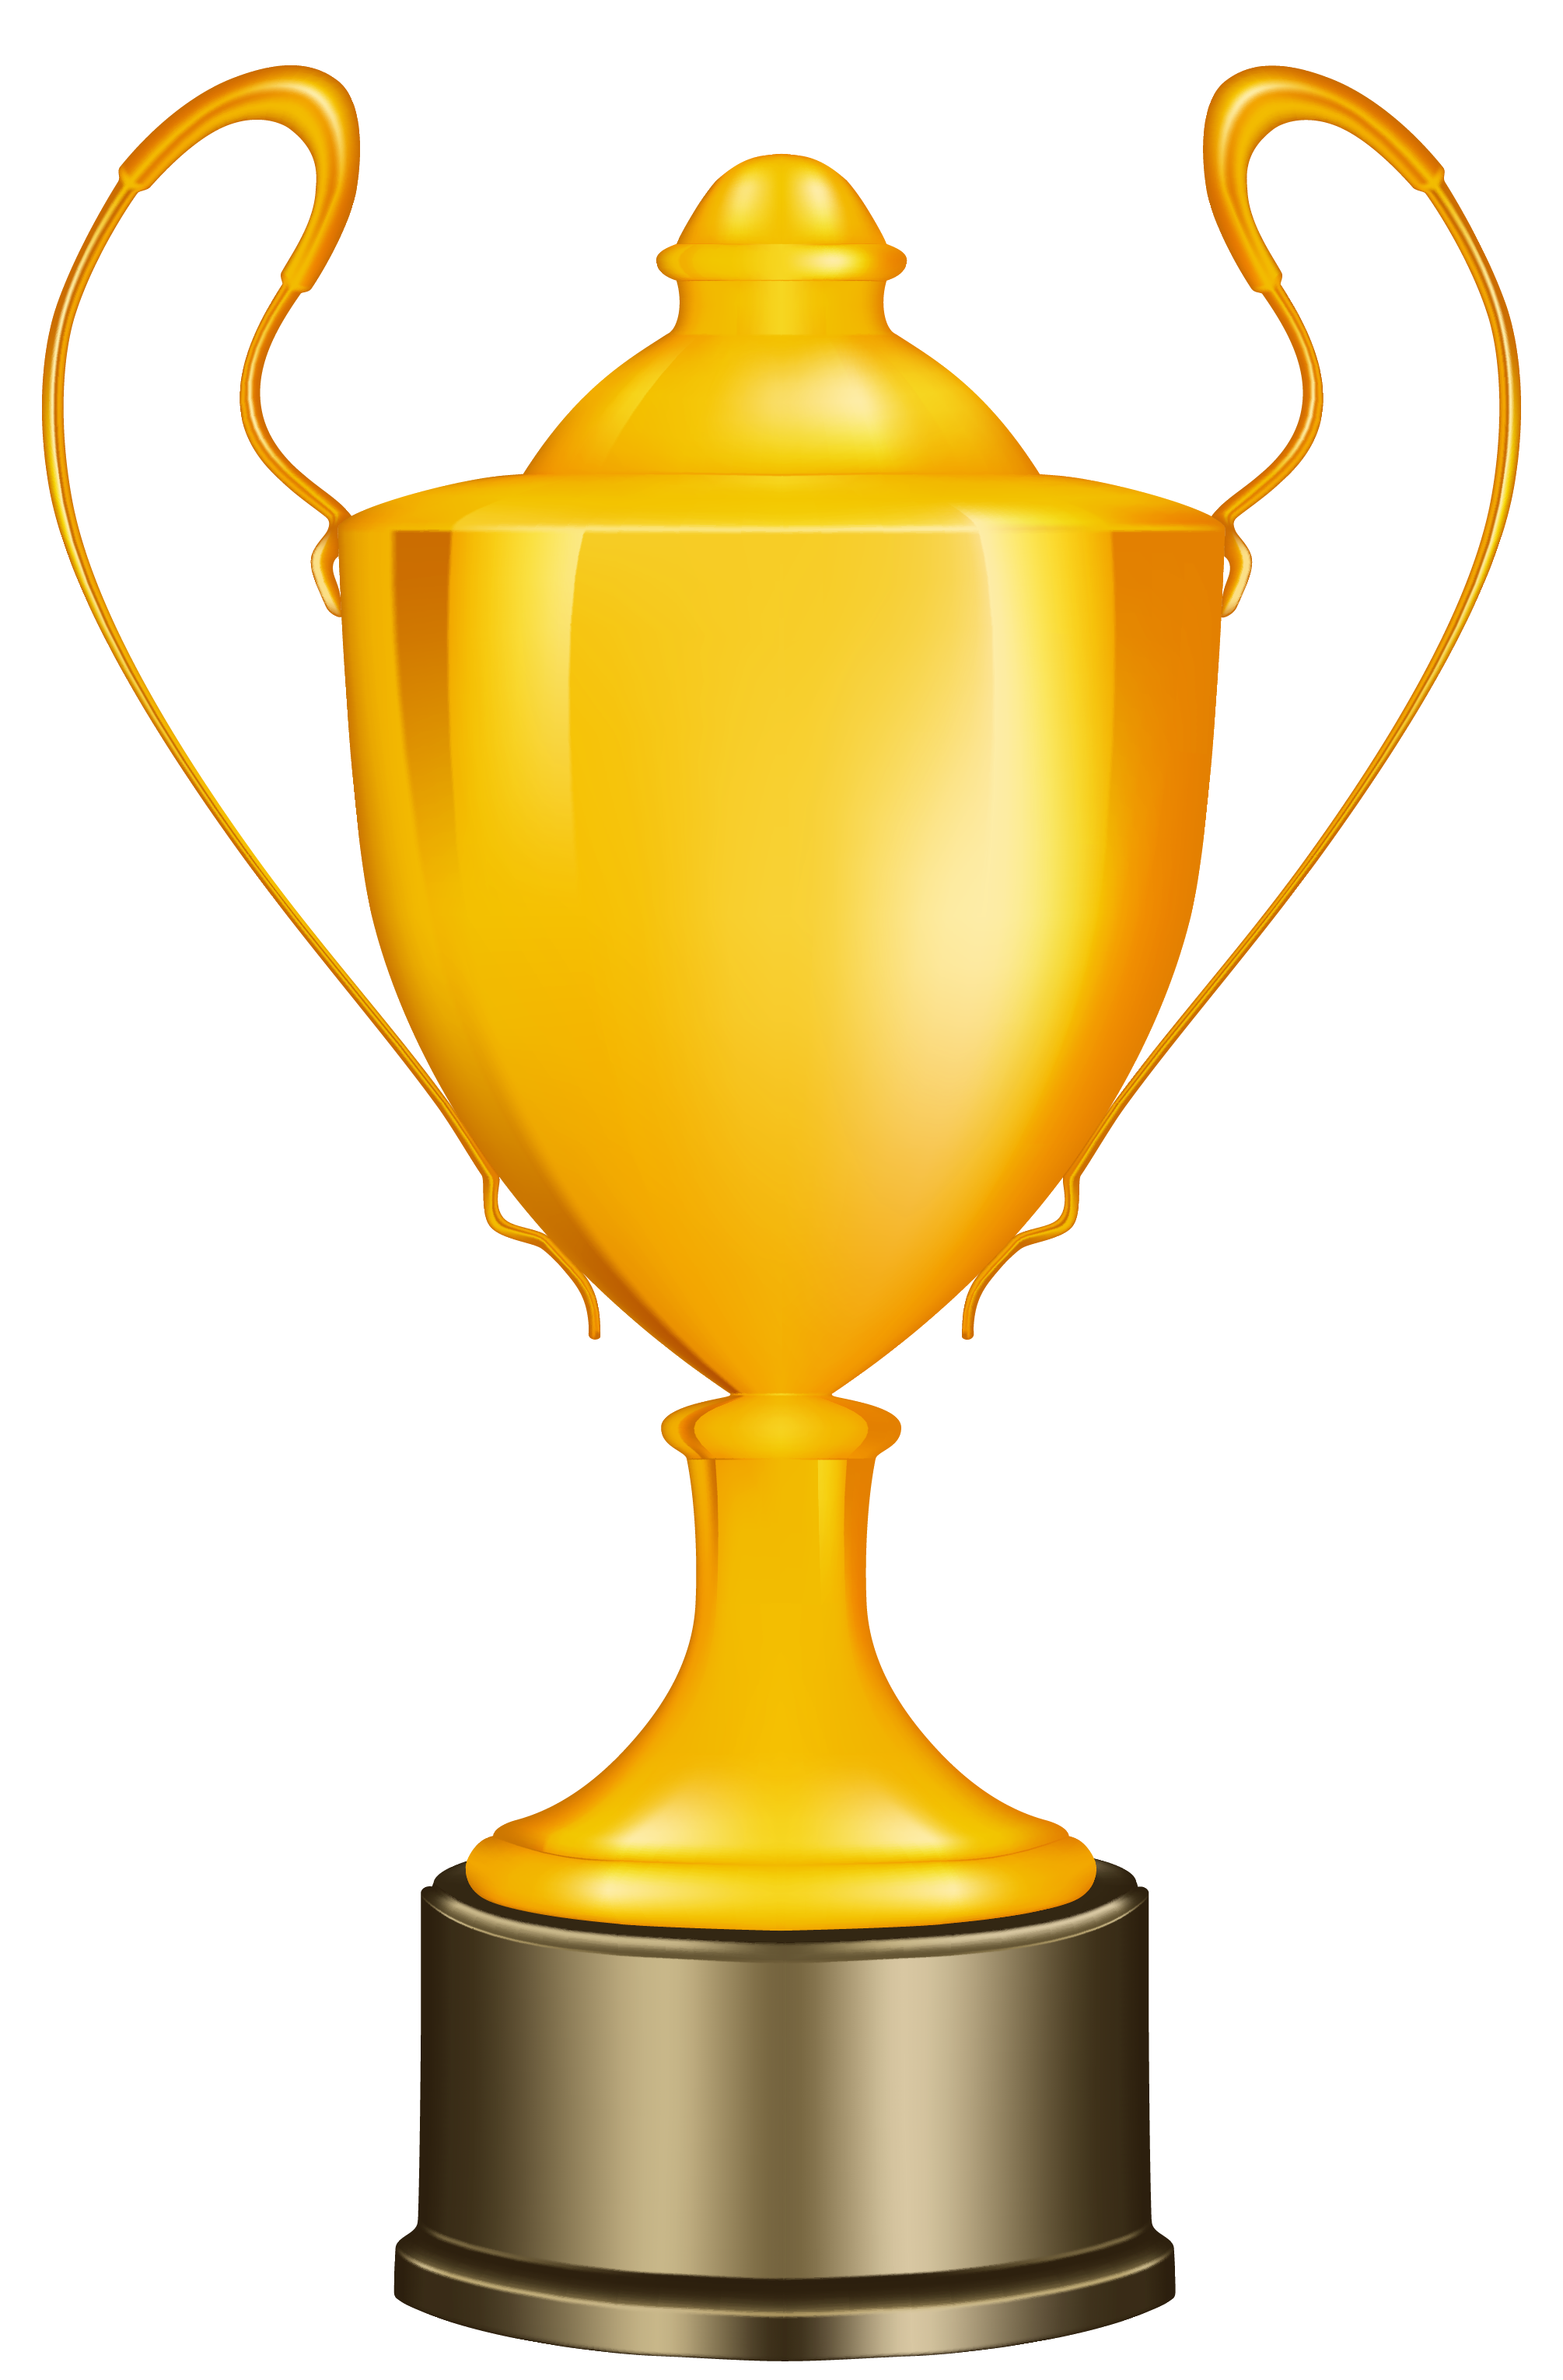 free clipart images trophy - photo #41